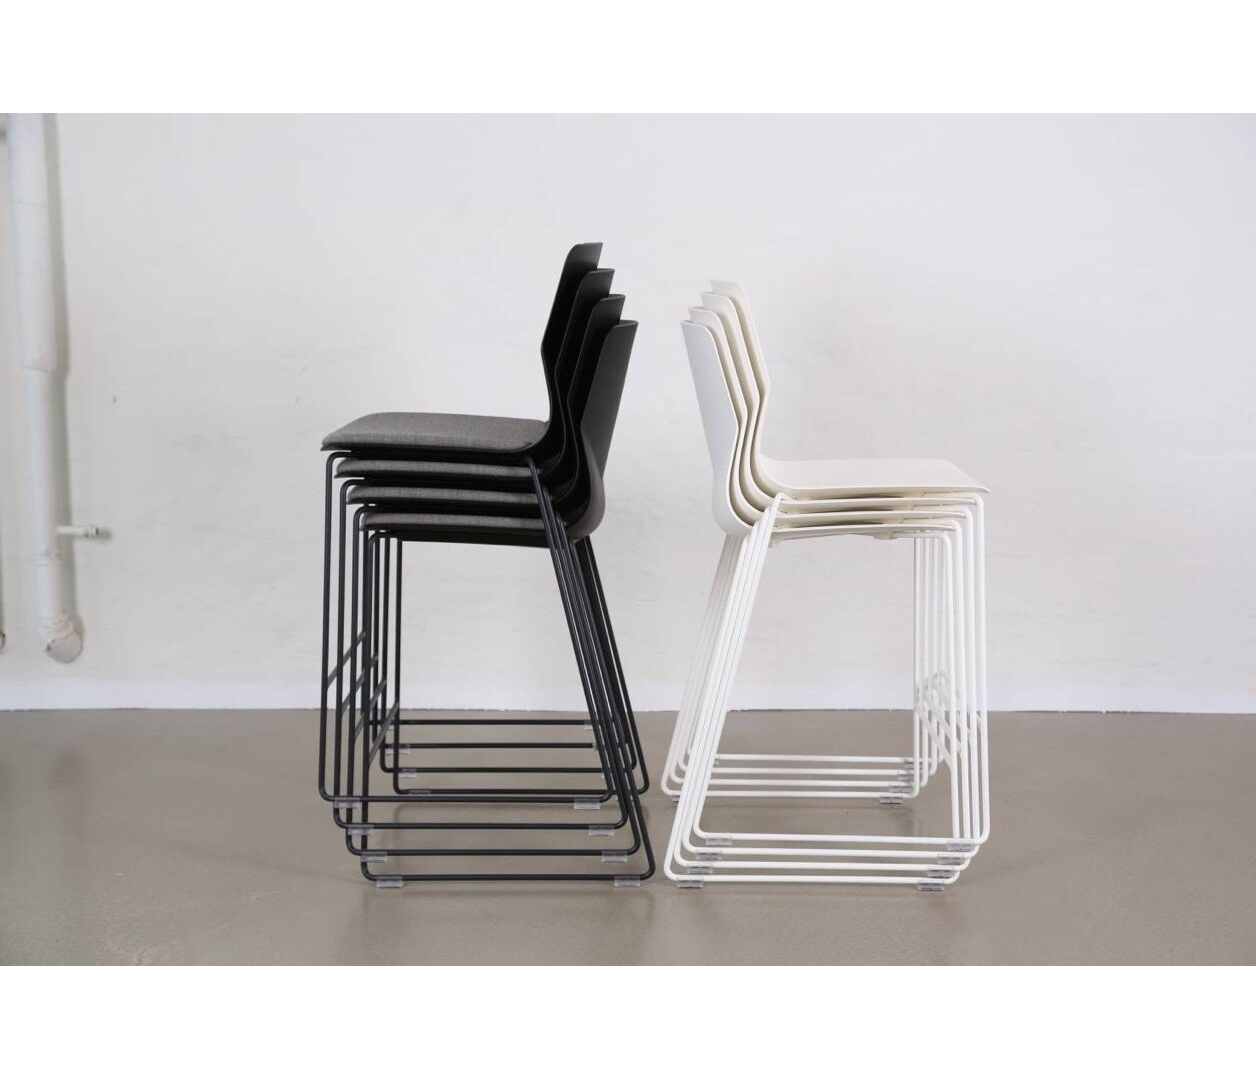 OCEE&FOUR – Chairs – FourSure 105 – Details Image 2 Large 2